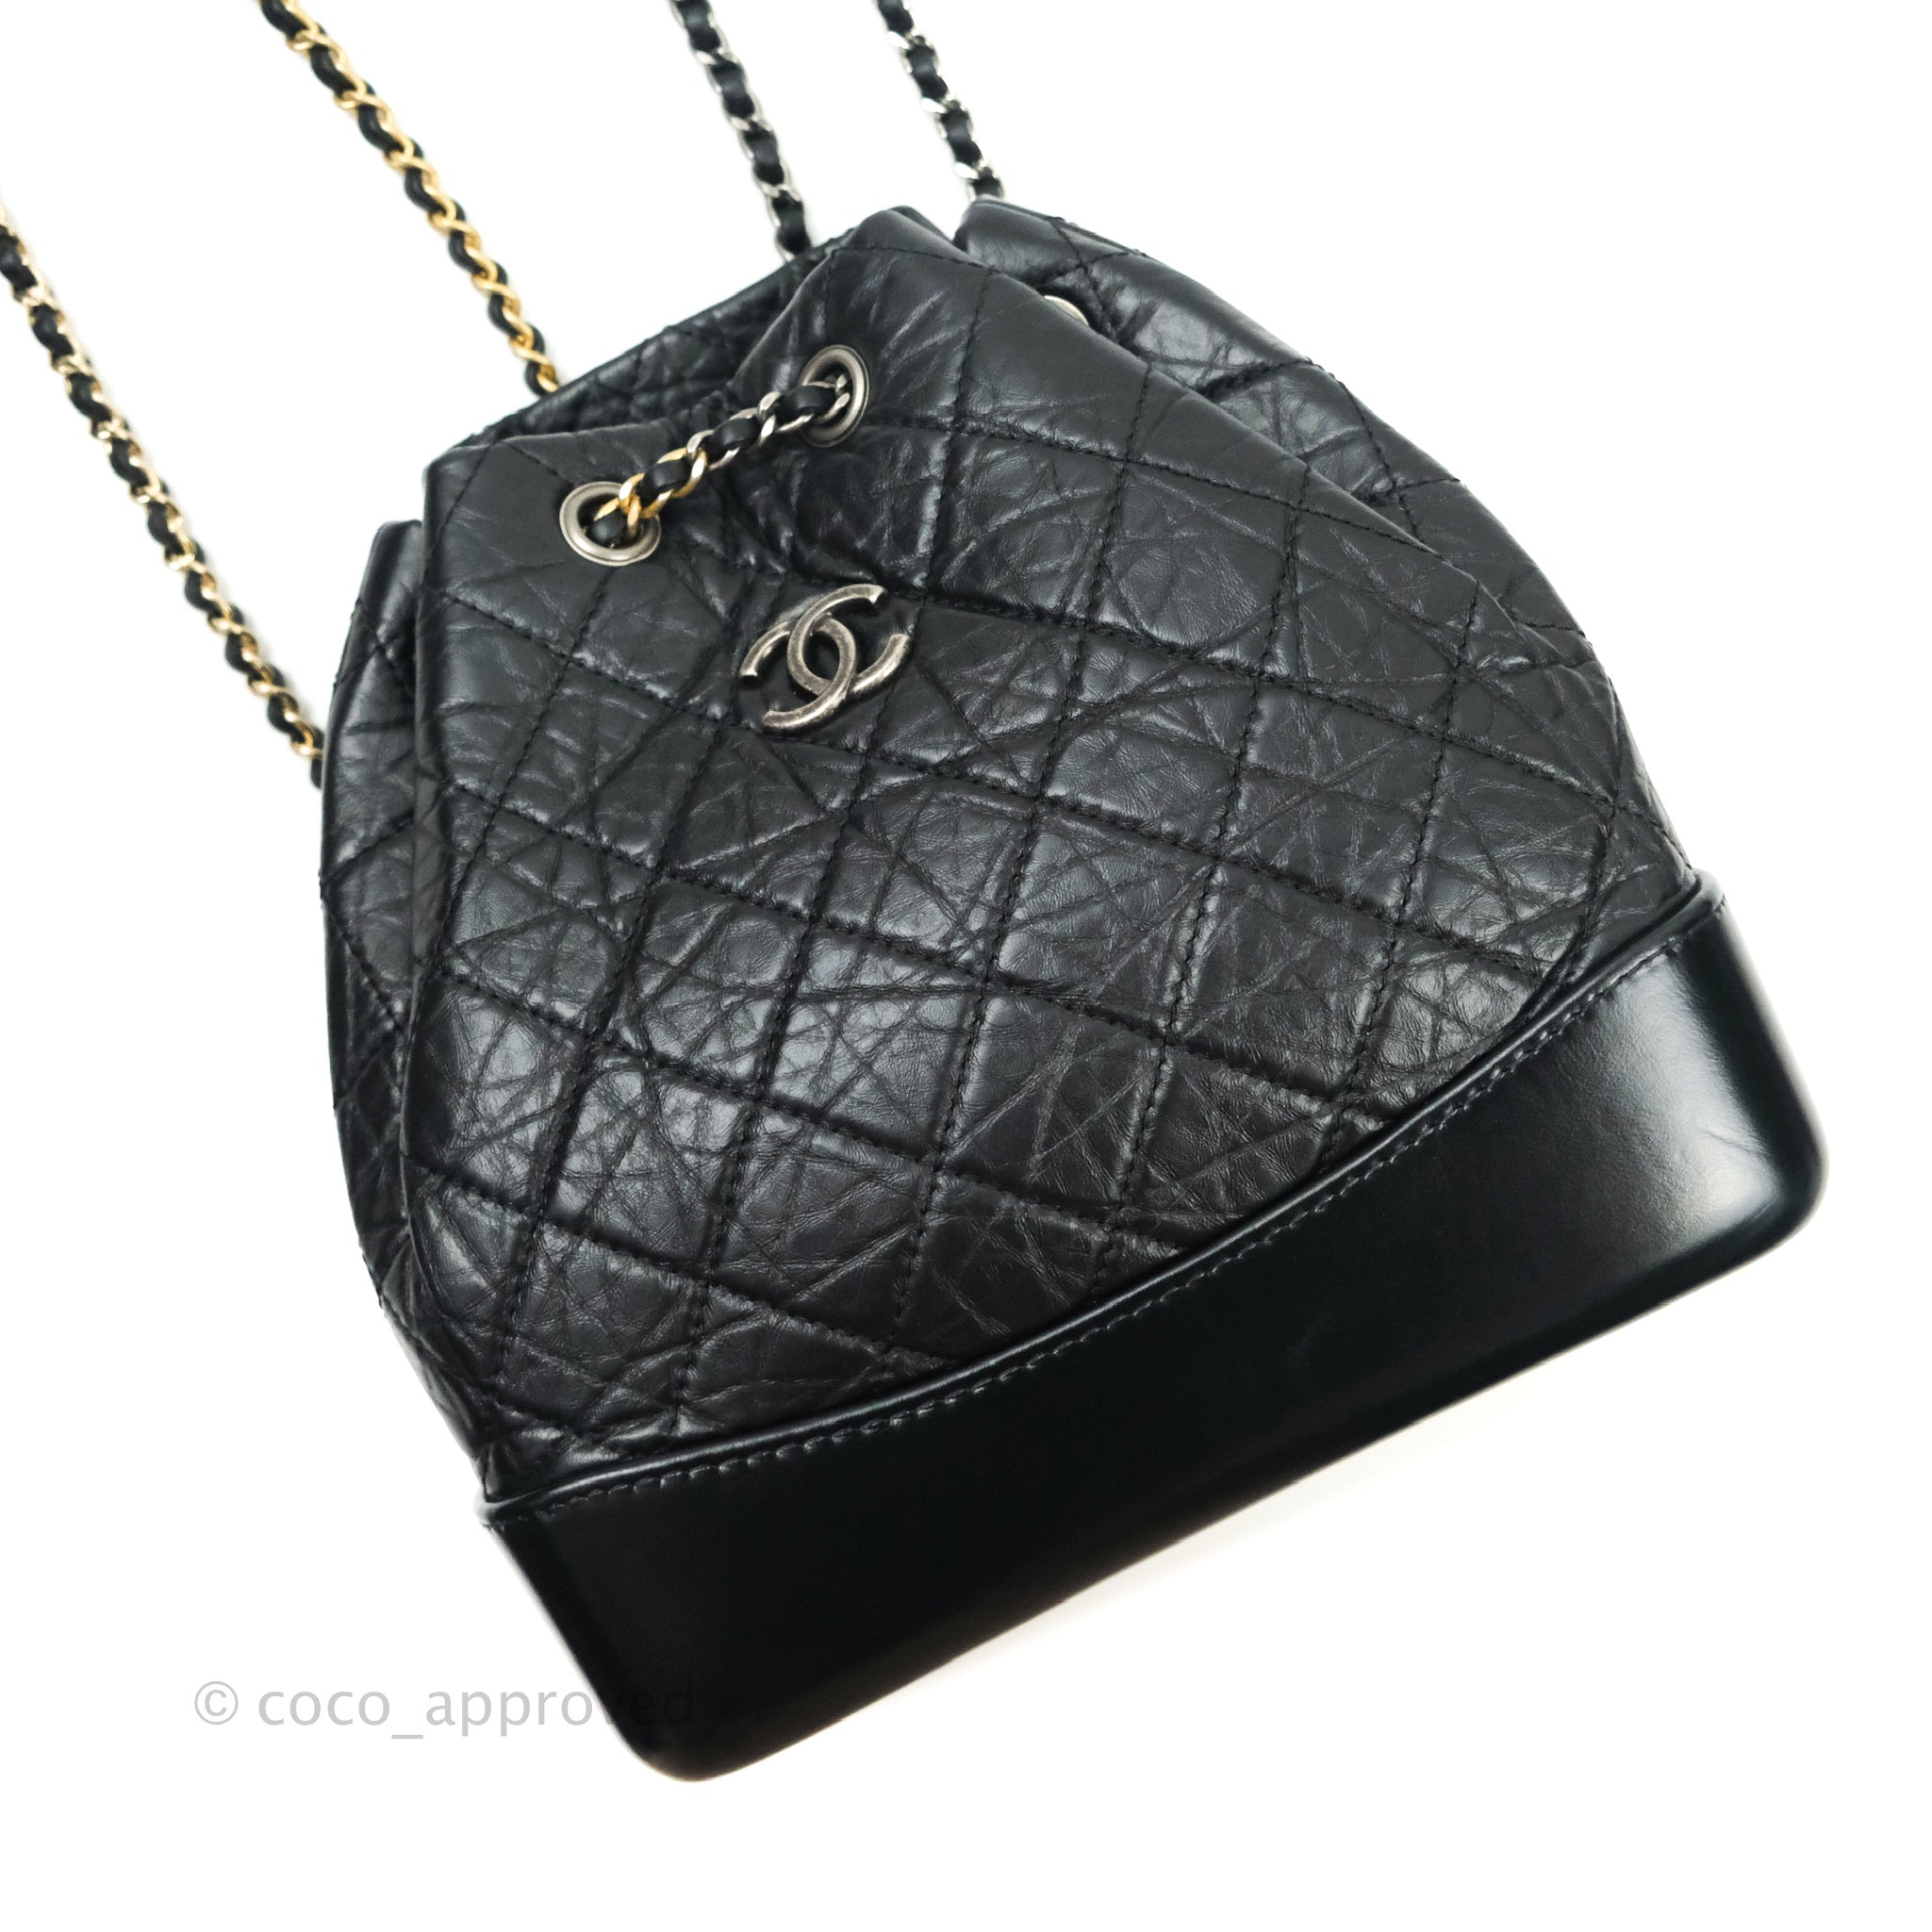 Chanel Gabrielle Backpack Black Aged Calfskin Small Black – Coco Approved  Studio